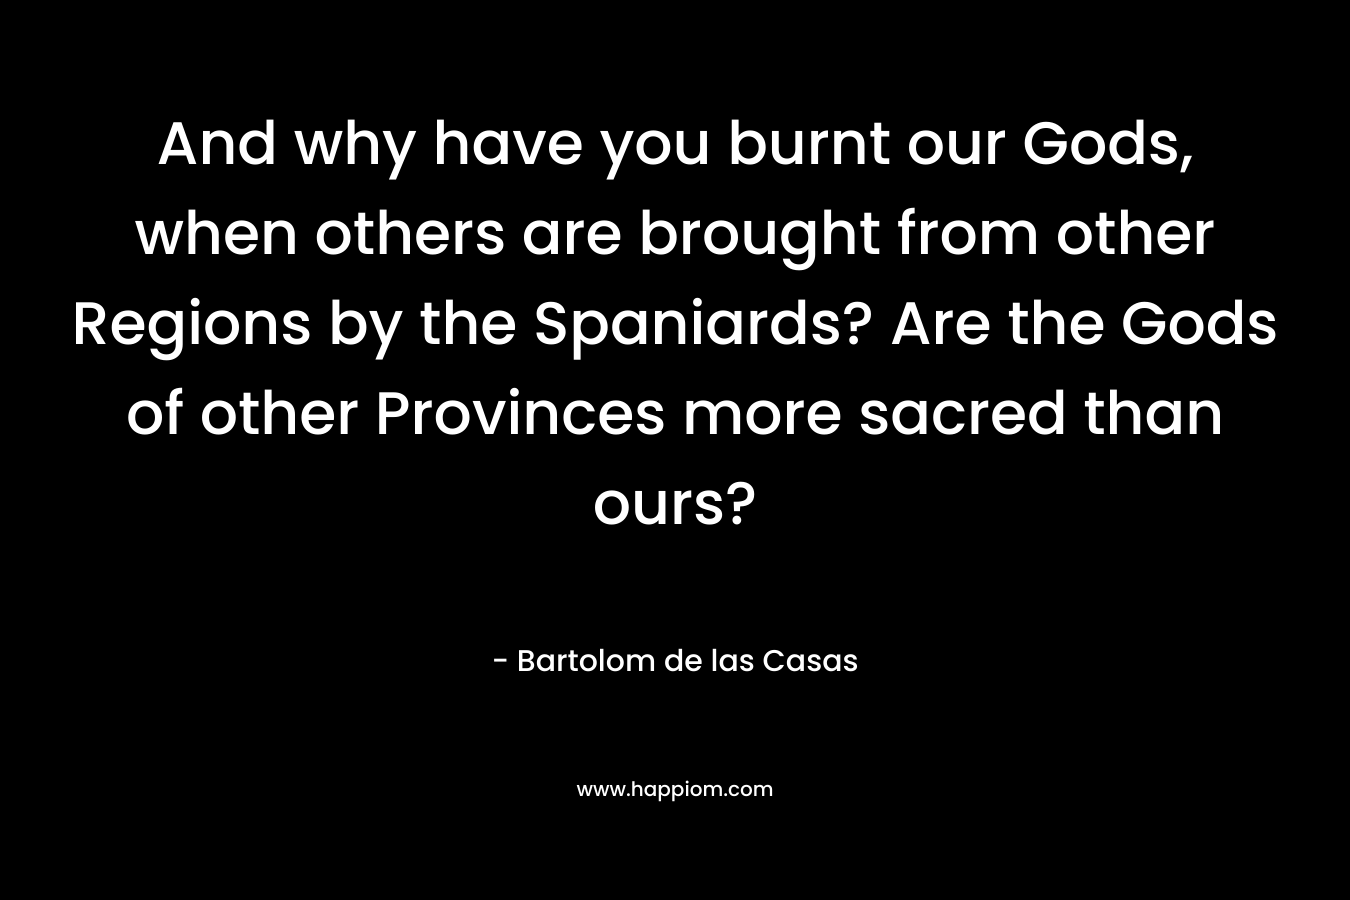 And why have you burnt our Gods, when others are brought from other Regions by the Spaniards? Are the Gods of other Provinces more sacred than ours?